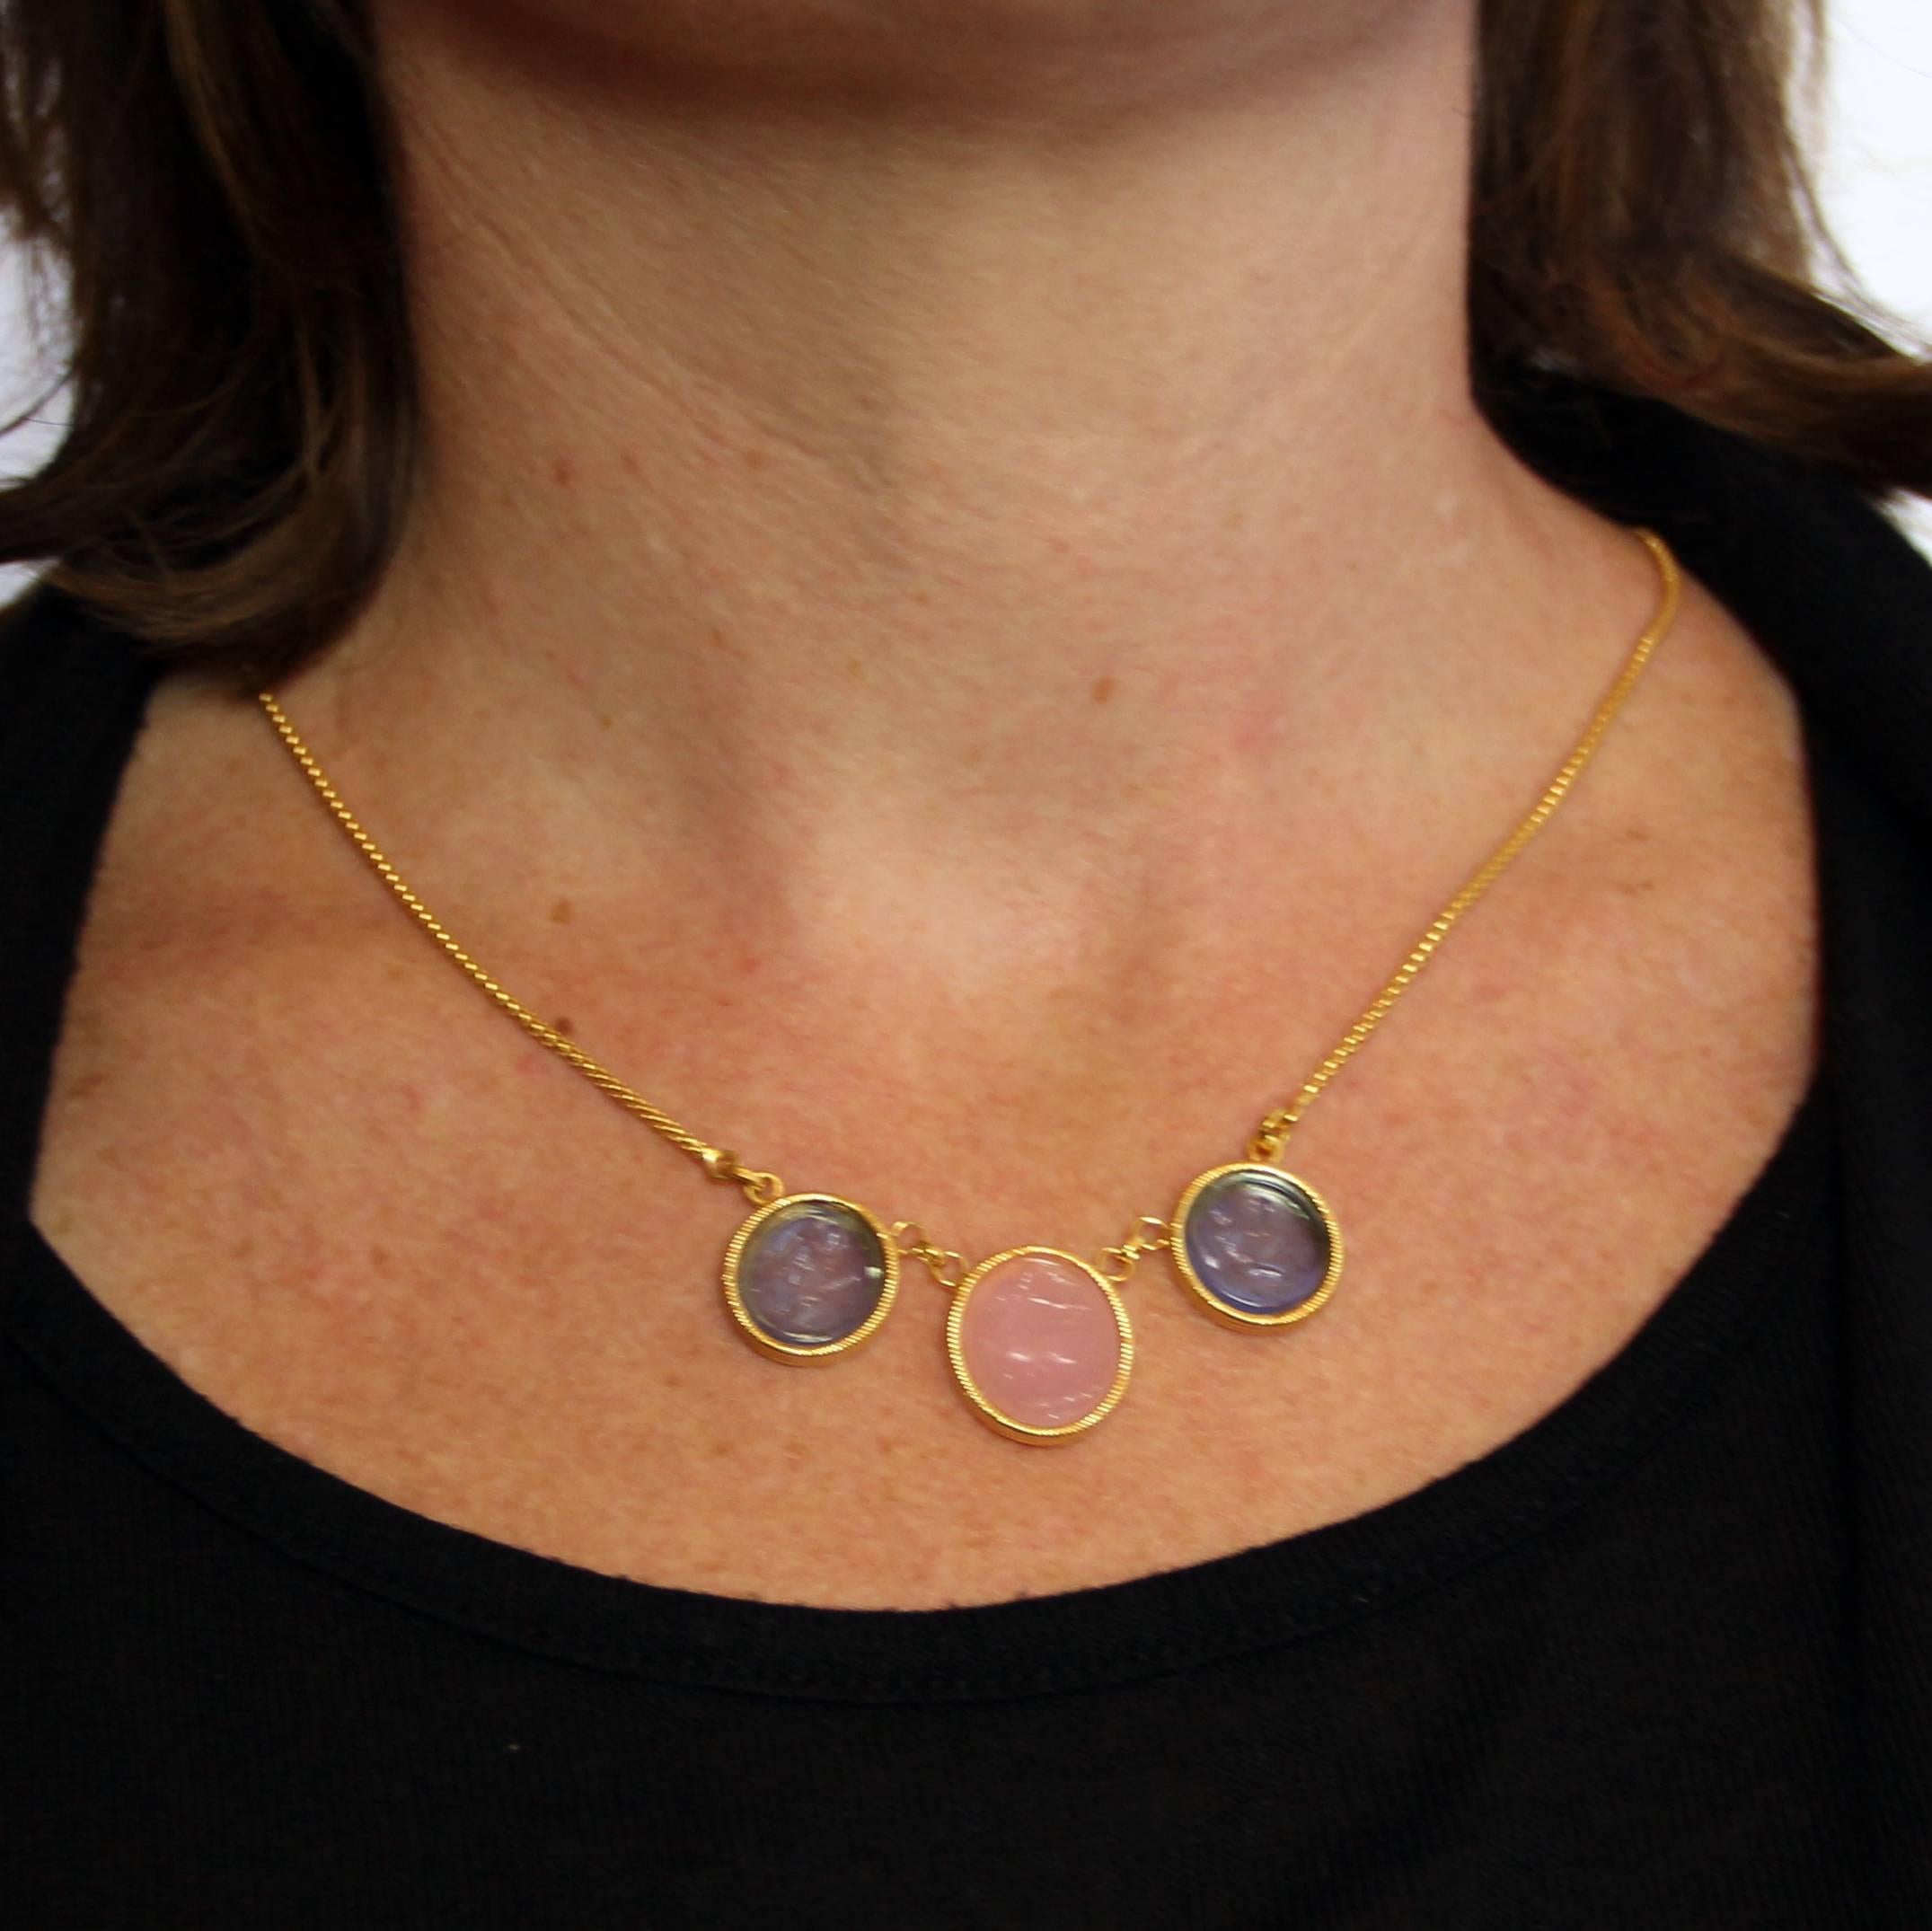 Necklace in vermeil, silver and yellow gold.
It is formed of 3 intaglios on glass paste set closed by a snake mesh chain. The clasp is a spring ring.
Total length of the necklace: 47.5 cm, total length of the motif: 5.5 cm, width at the widest: 1.9